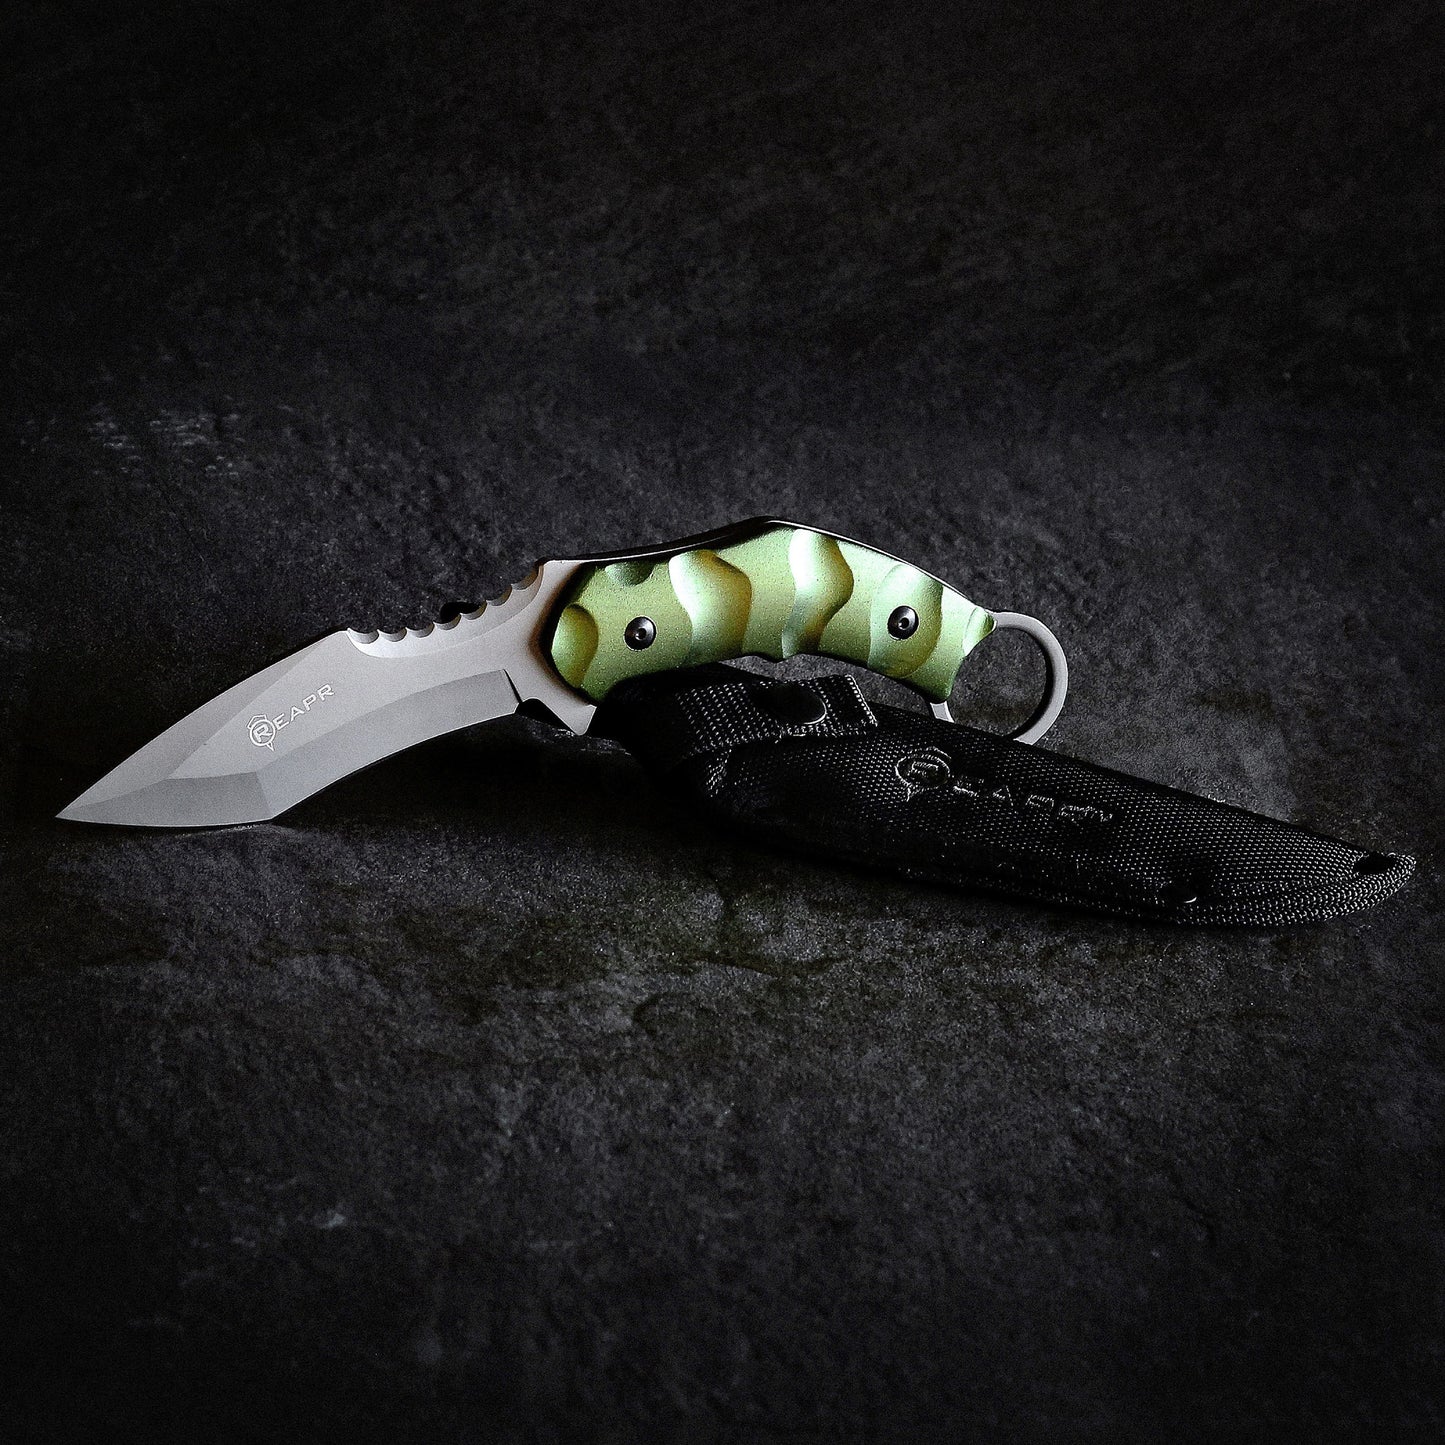 REAPR 11010 Fixed Blade SLAMR Knife full tang design allows extra strength and leverage for cutting, slashing and chopping.